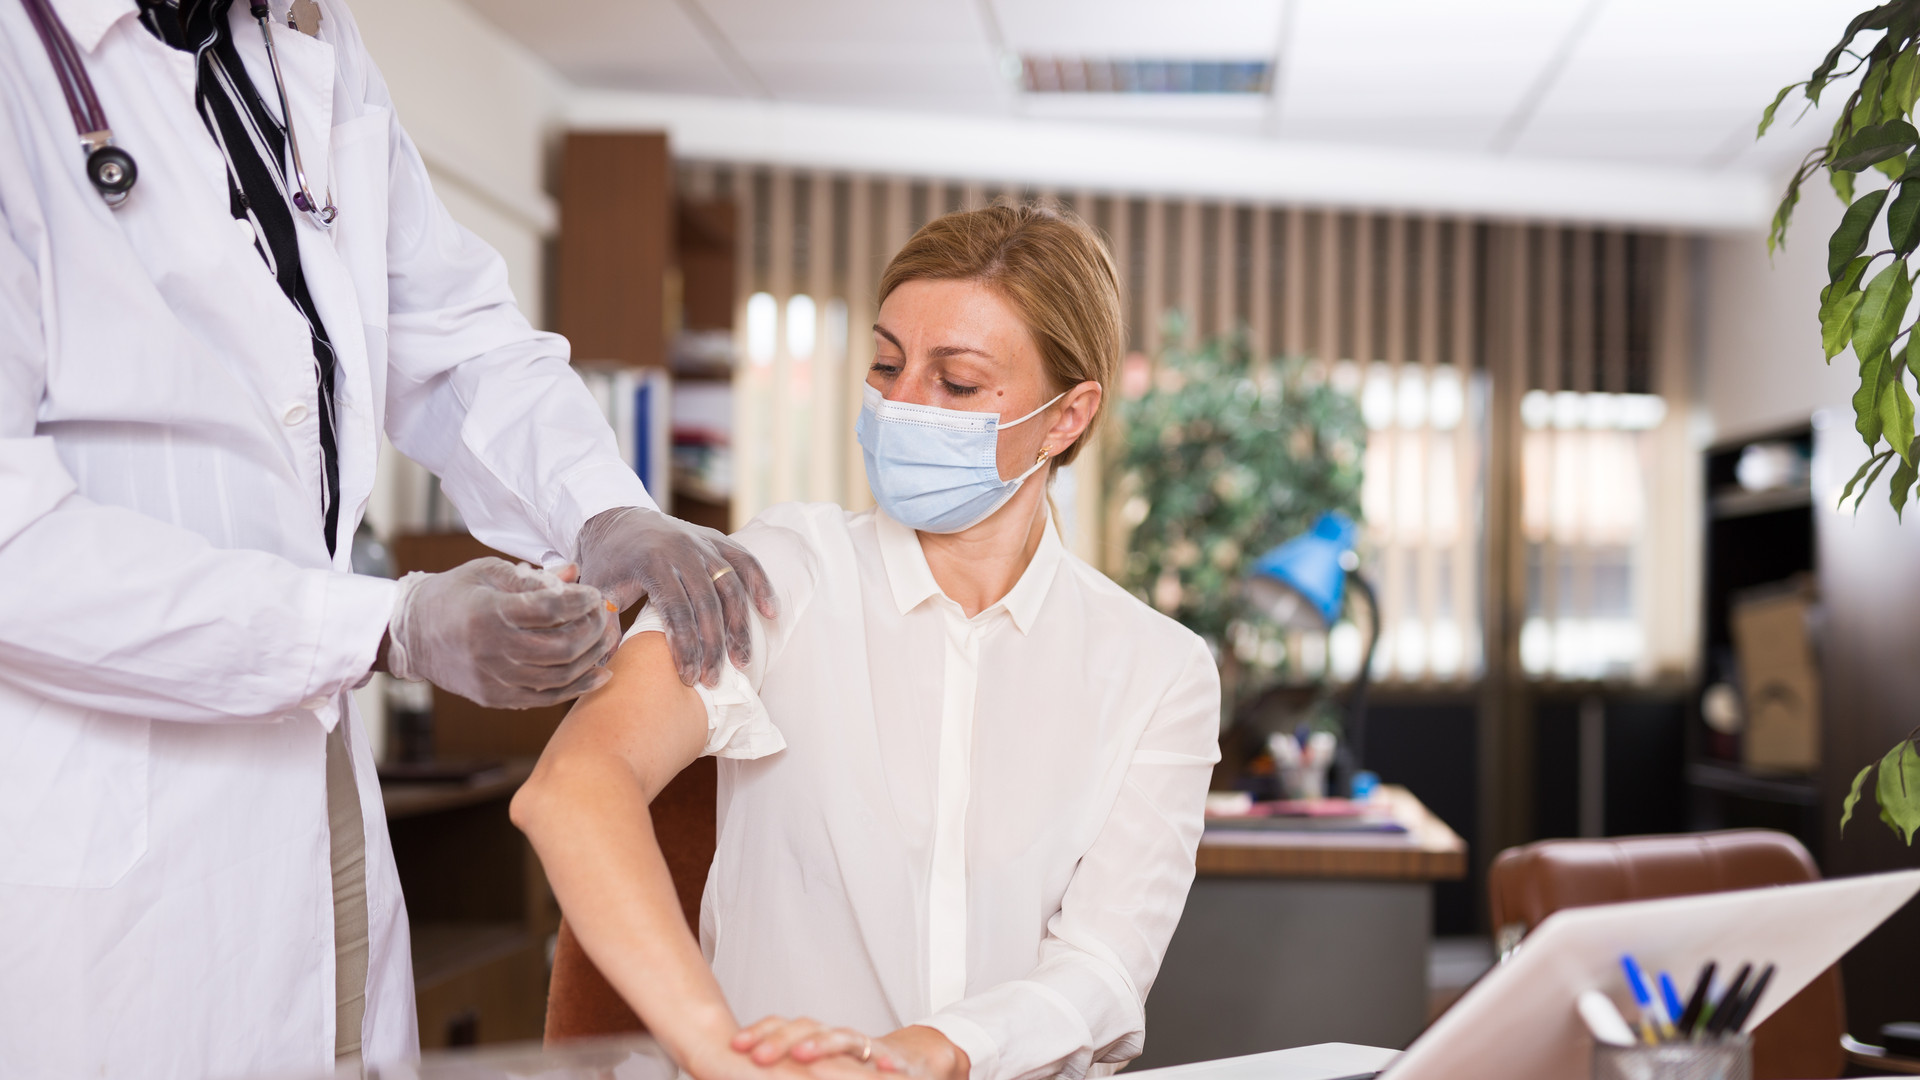 Doctor in coat and protective mask giving vaccine injection to woman manager